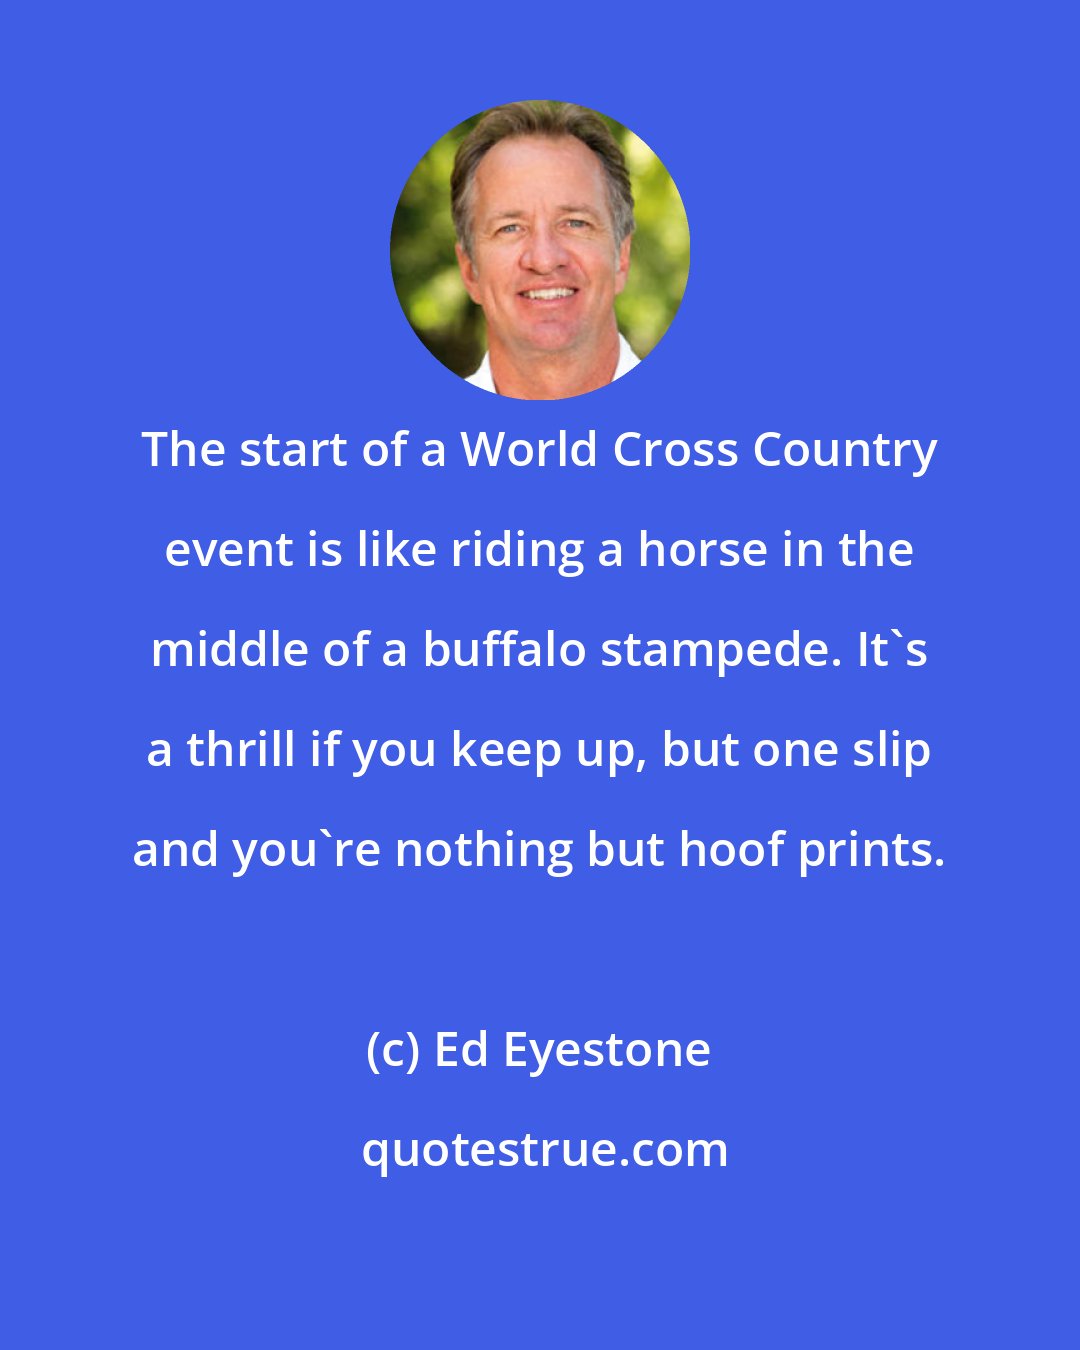 Ed Eyestone: The start of a World Cross Country event is like riding a horse in the middle of a buffalo stampede. It's a thrill if you keep up, but one slip and you're nothing but hoof prints.